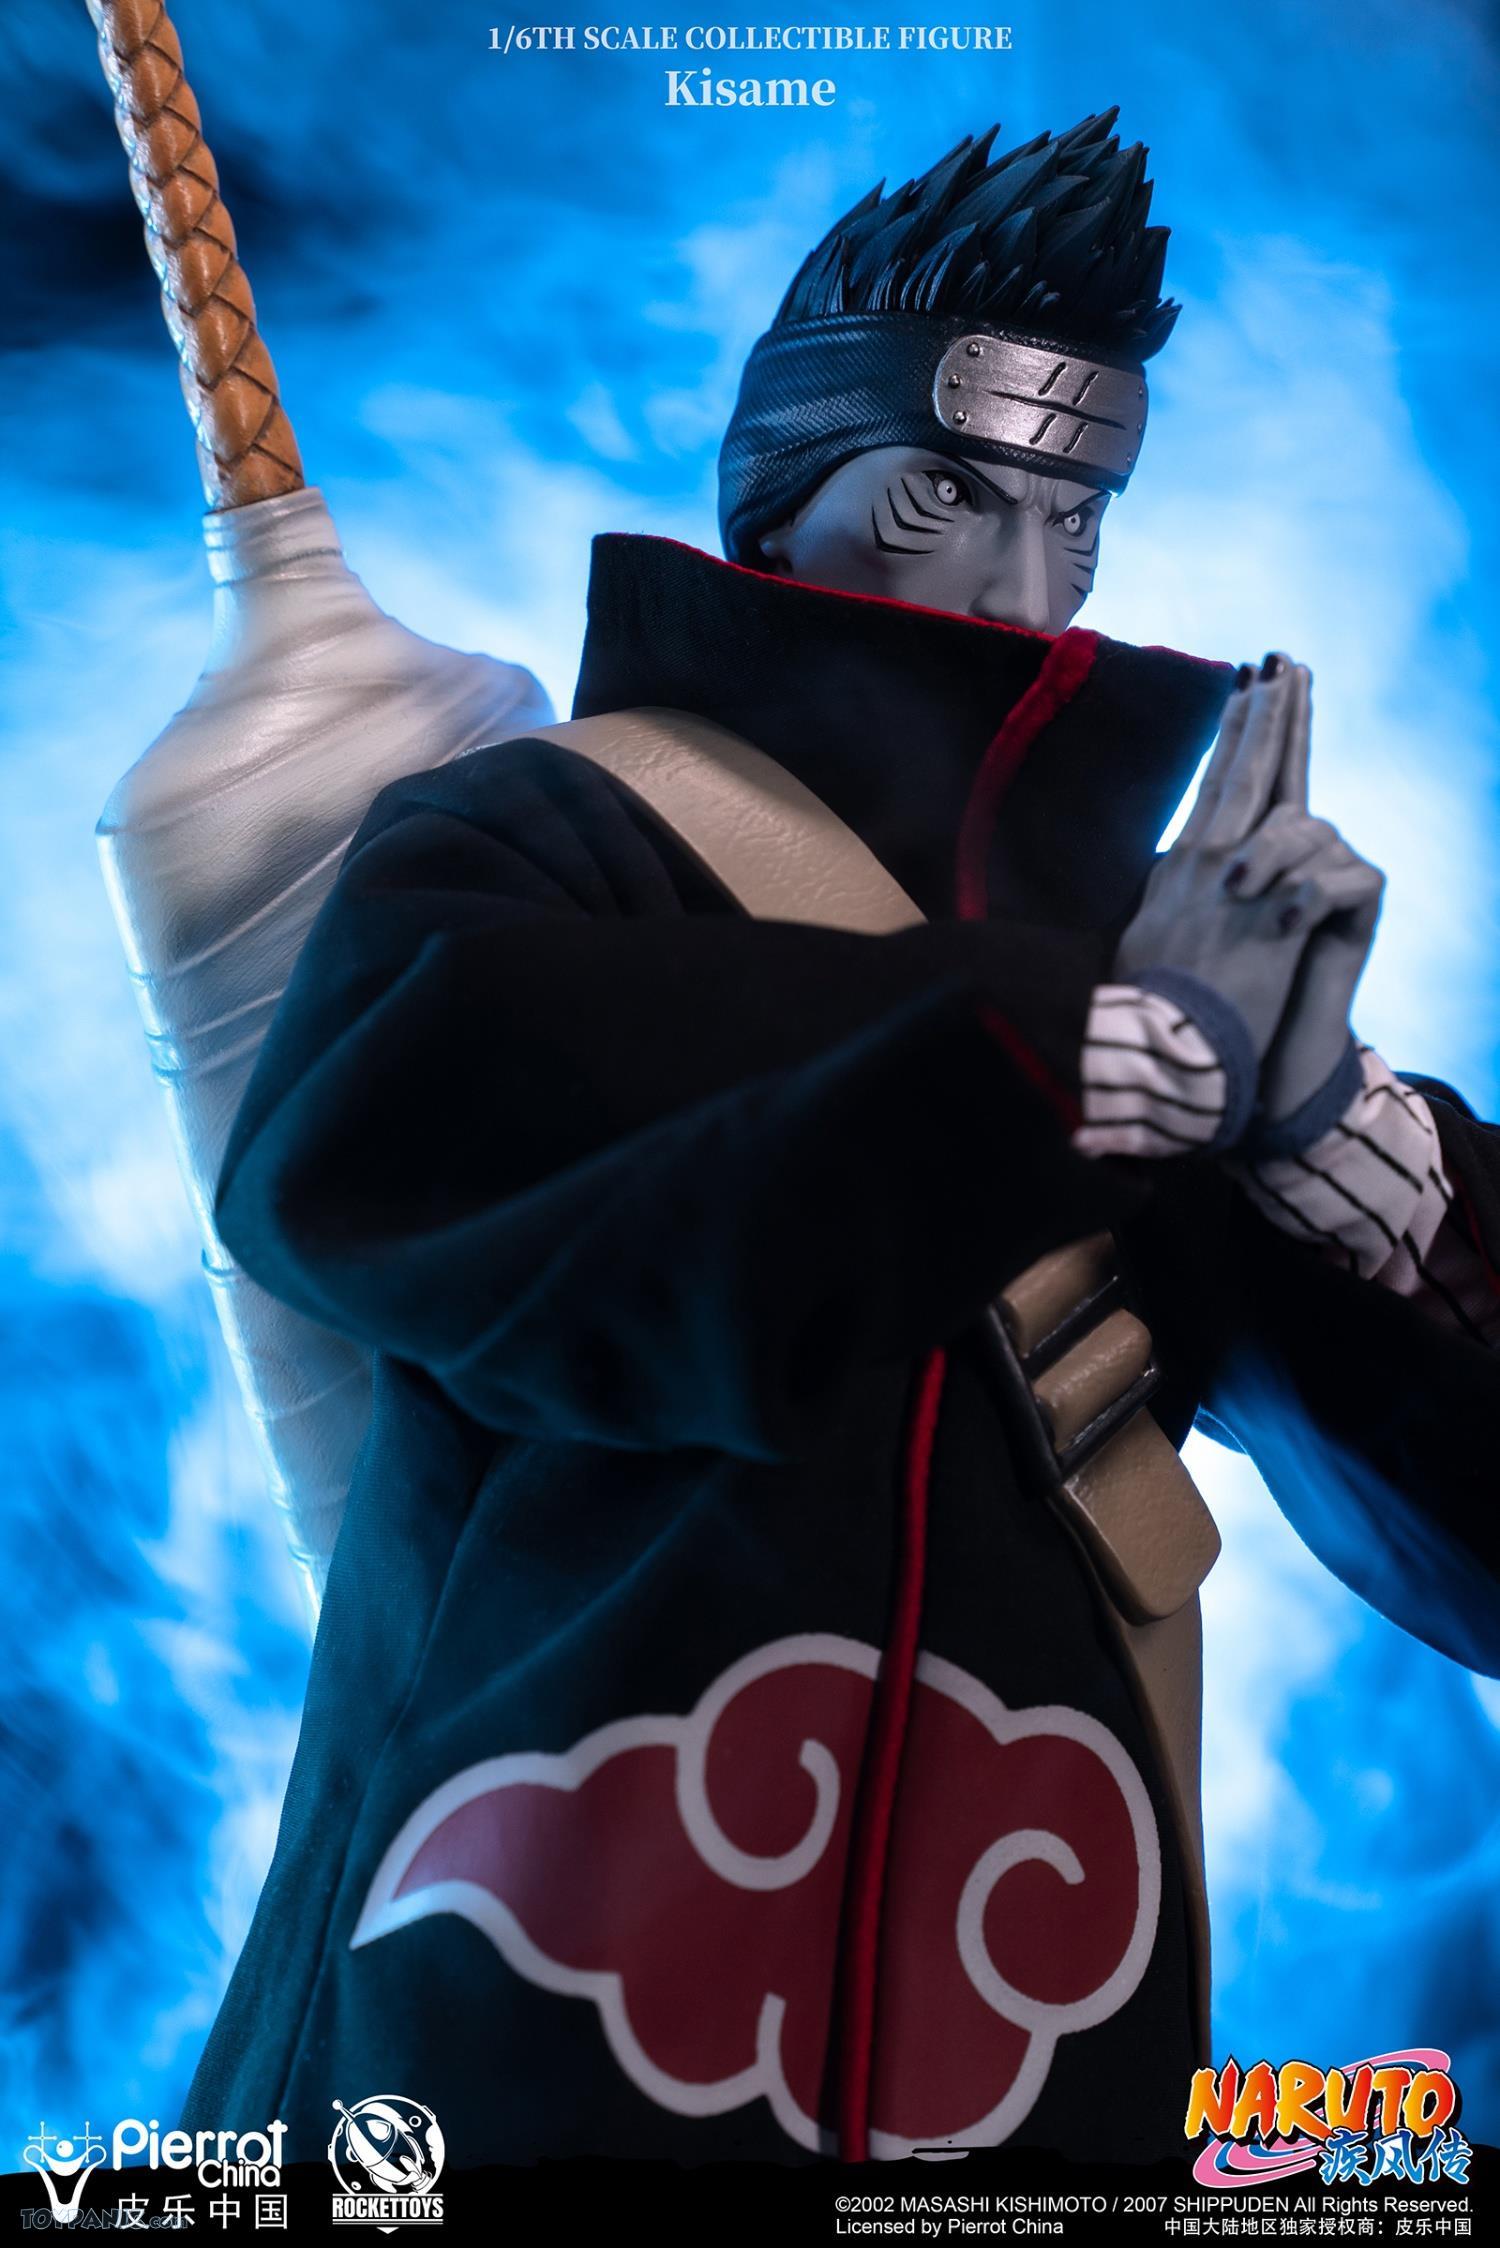 NEW PRODUCT: Rocket Toys ROC-007 1/6 Scale Kisame 221202460438PM_9720868